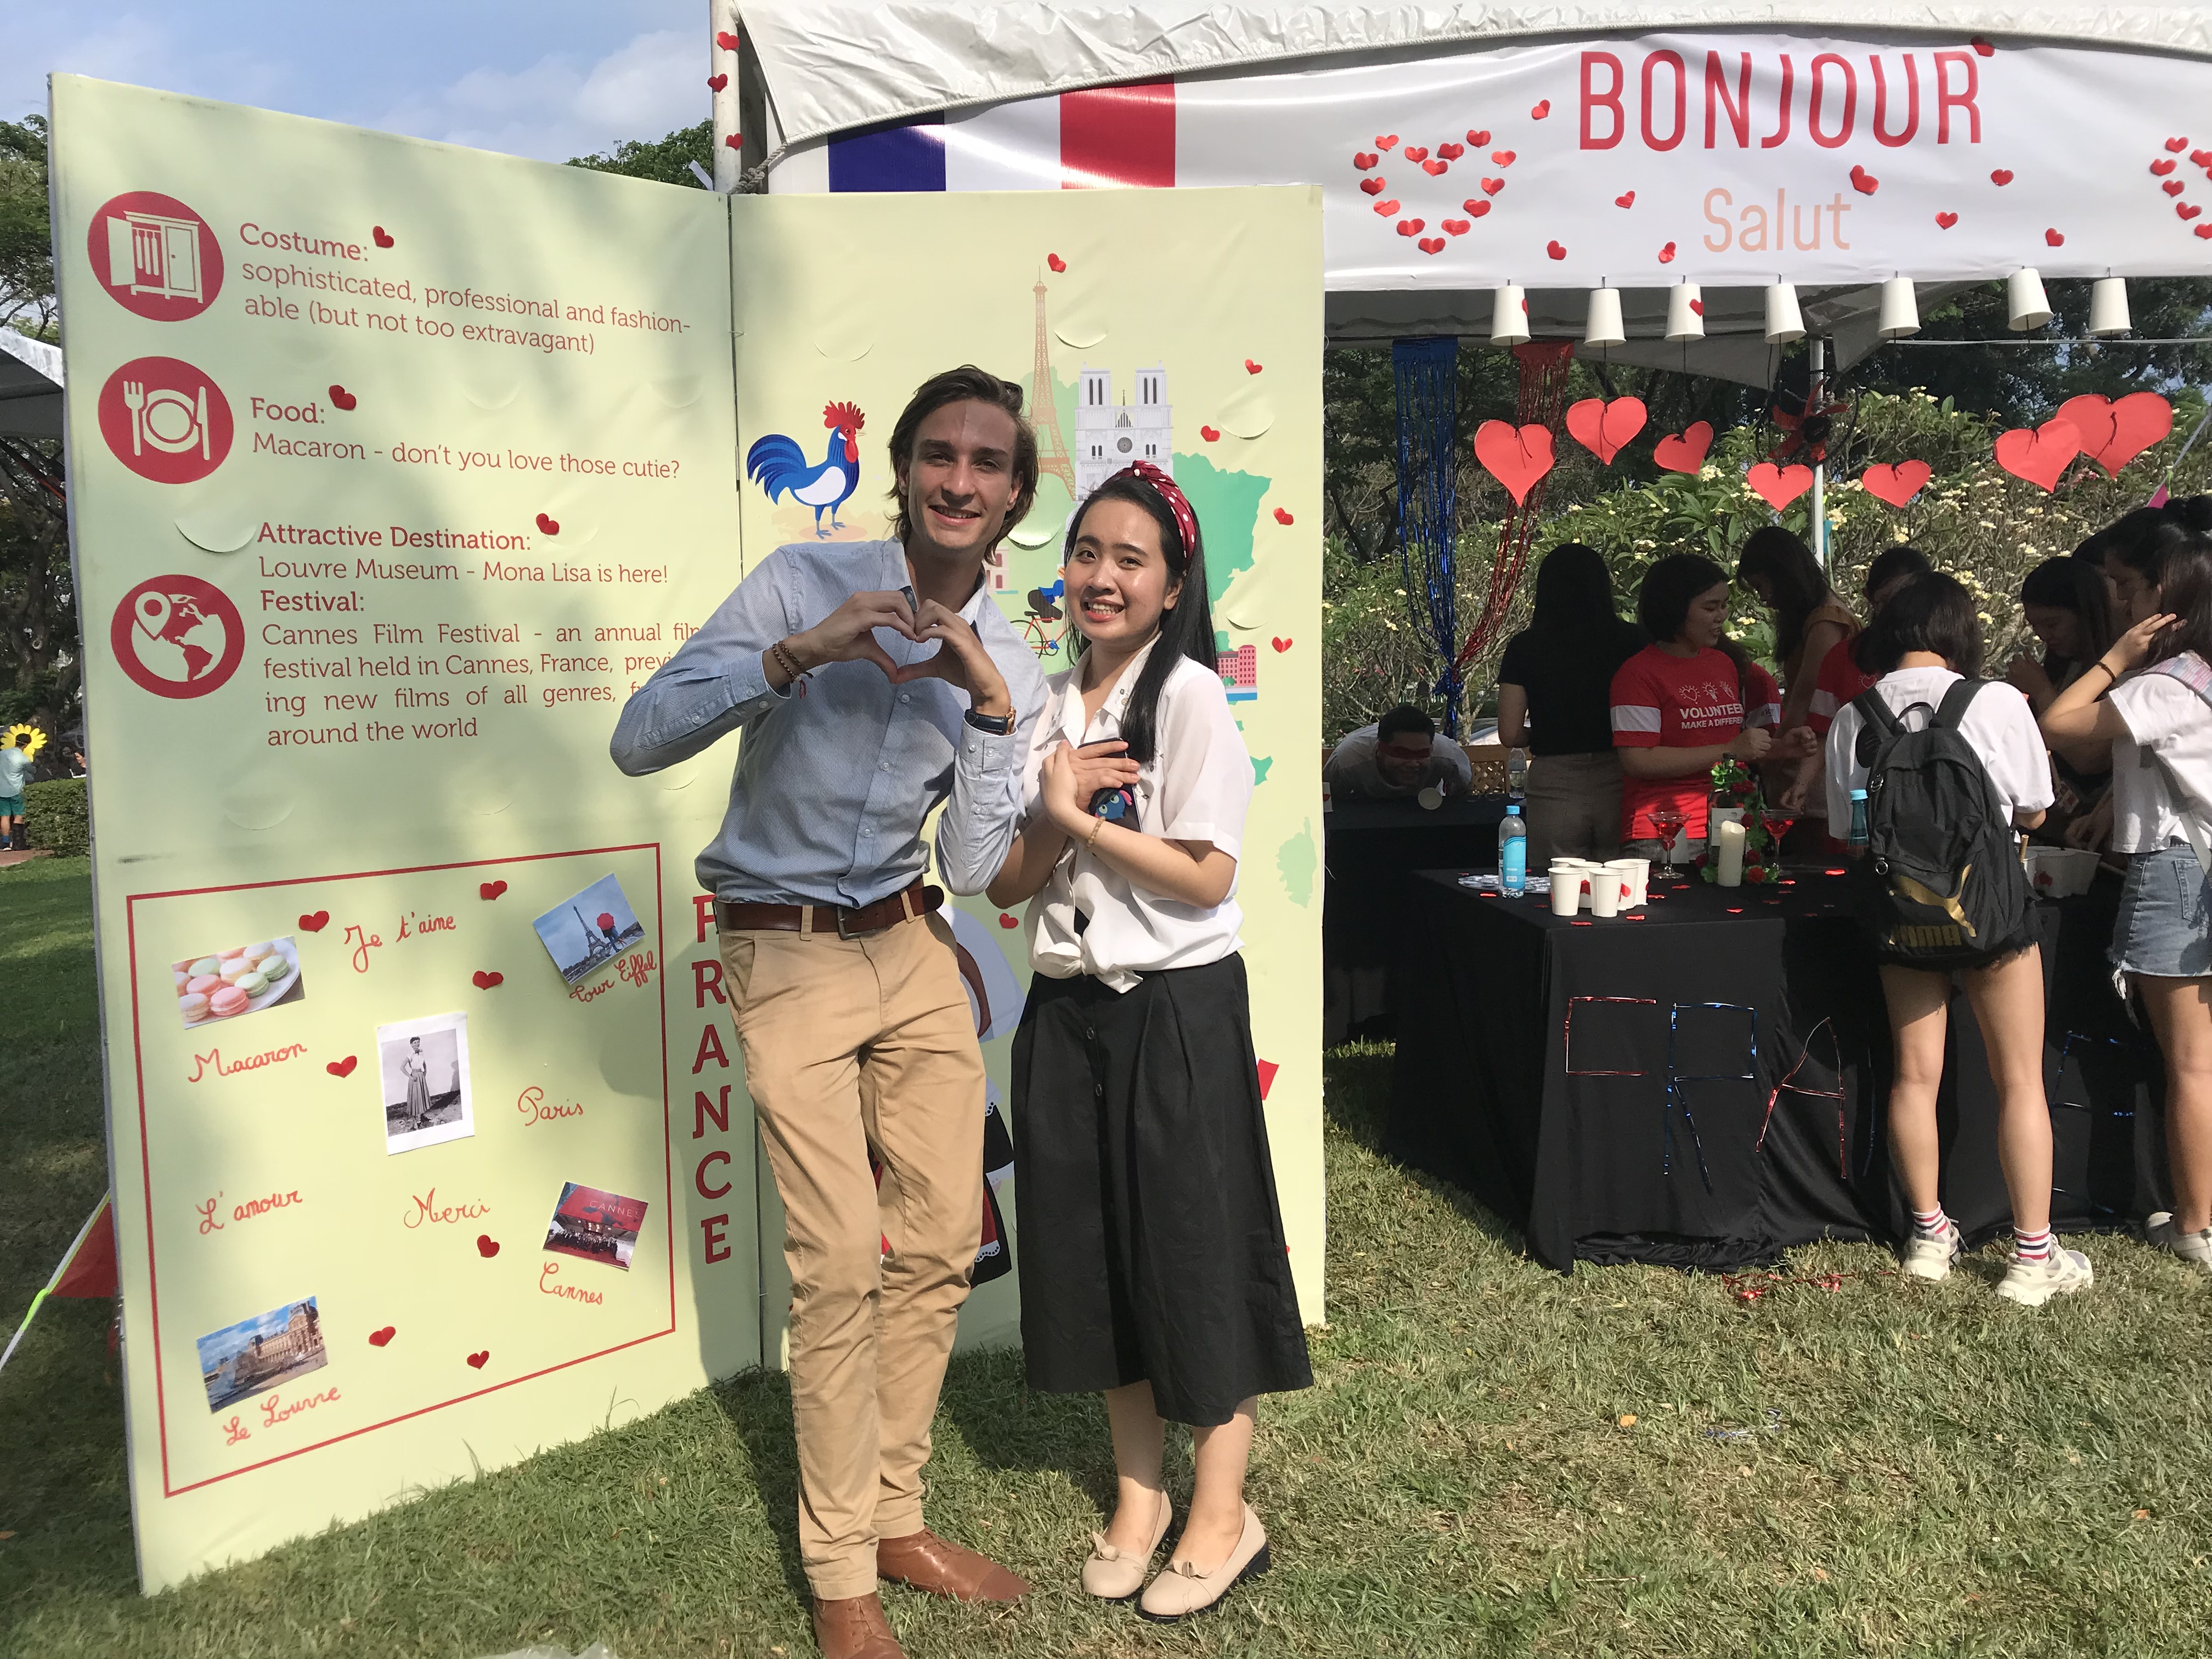 Pierre-Mael Dousson, an exchange student from the PSB Paris School of Business in France, and his team represented the French cultural booth.